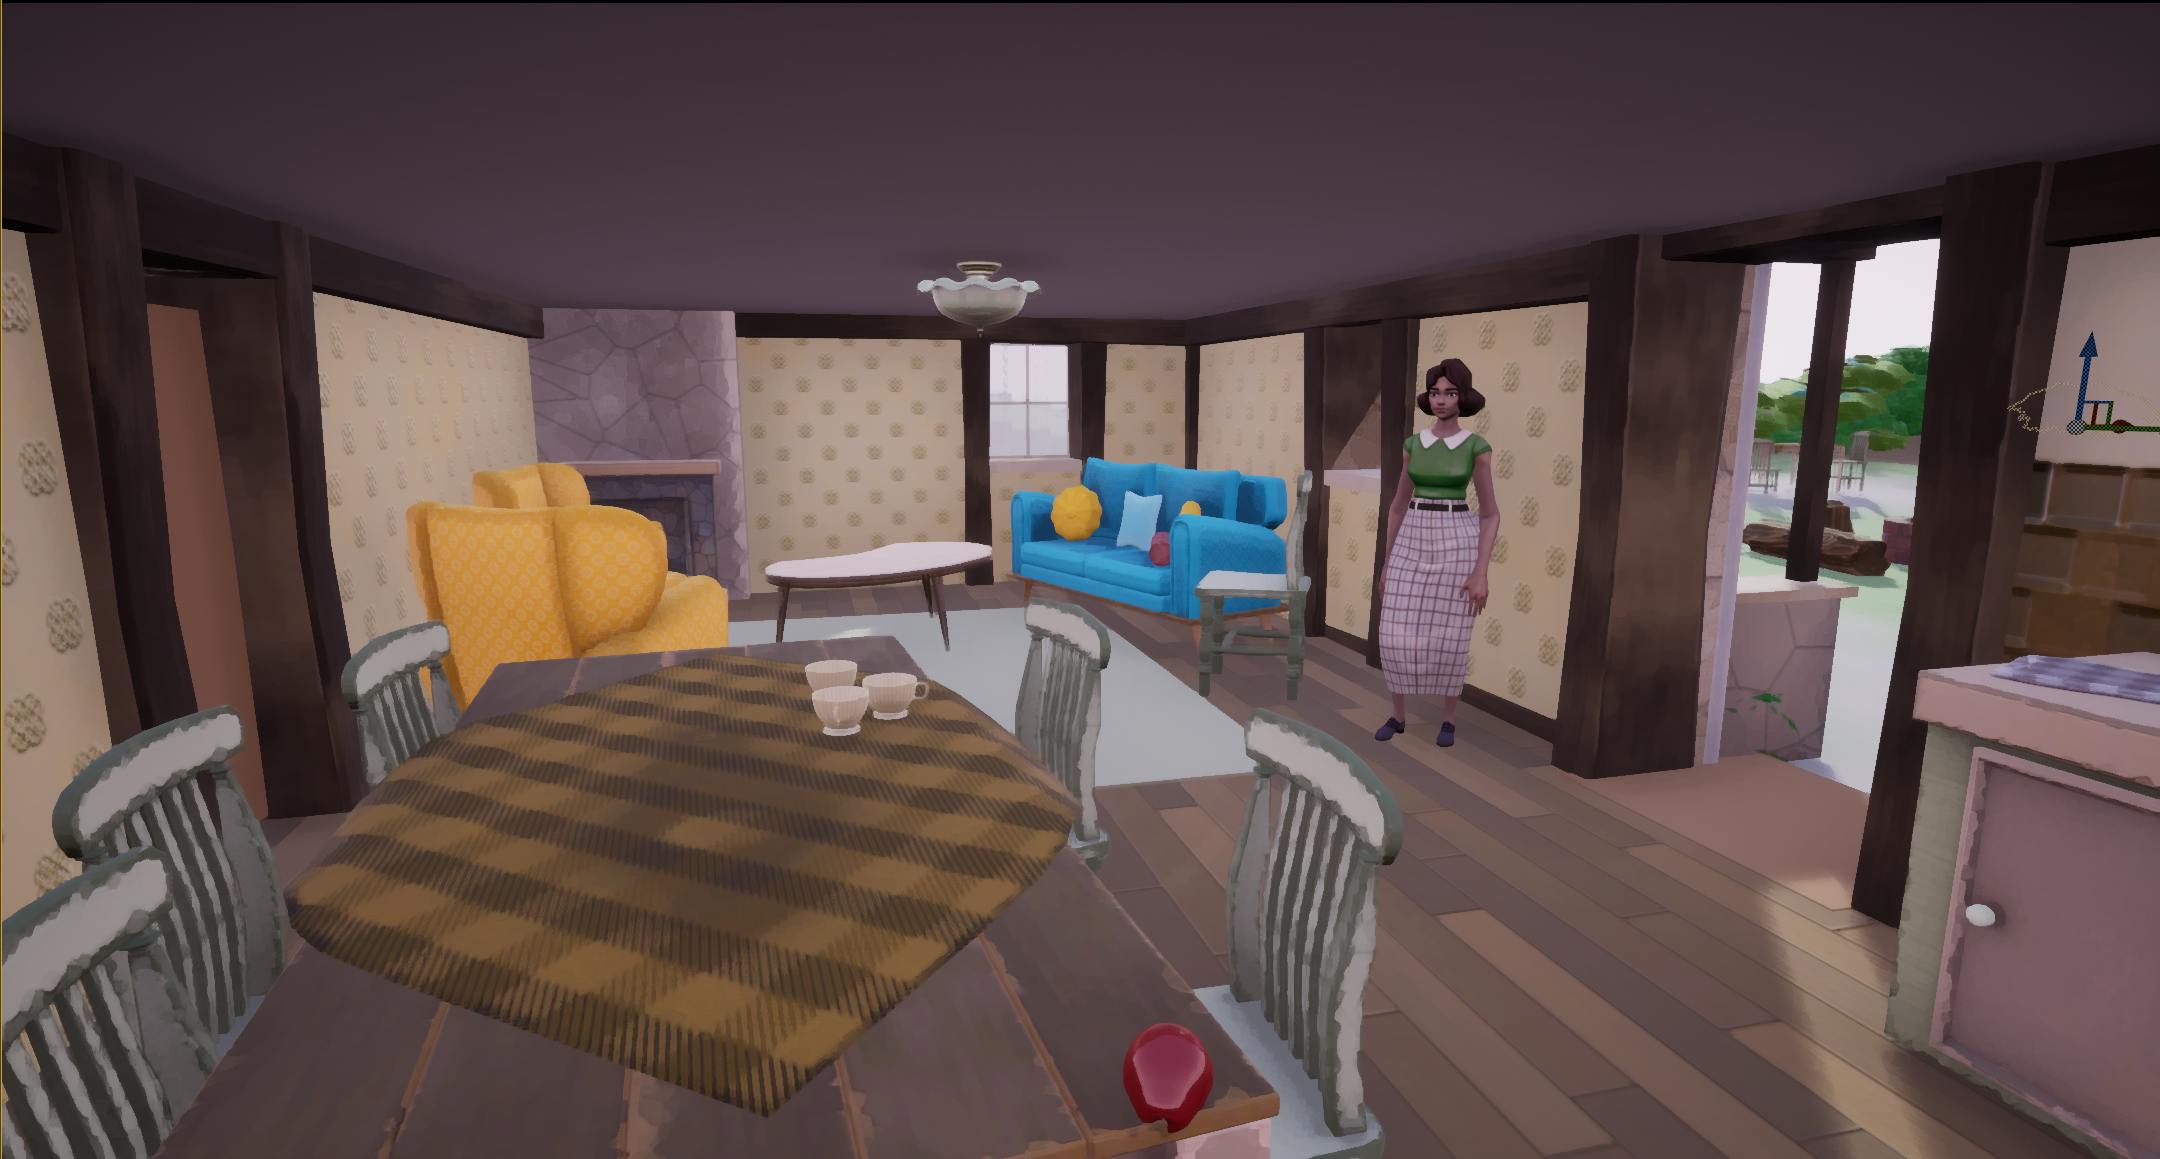 The inside of Cornwall Cottage. In the foreground is a table with a dark, checked tablecloth and six chairs. In the background is a blue sofa and a yellow chair, either side of a stone fireplace. The walls are papered with cream patterned paper. Phyllis, a black woman with medium-length, dark hair, a pale skirt and green top, is standing next to the open cottage door.